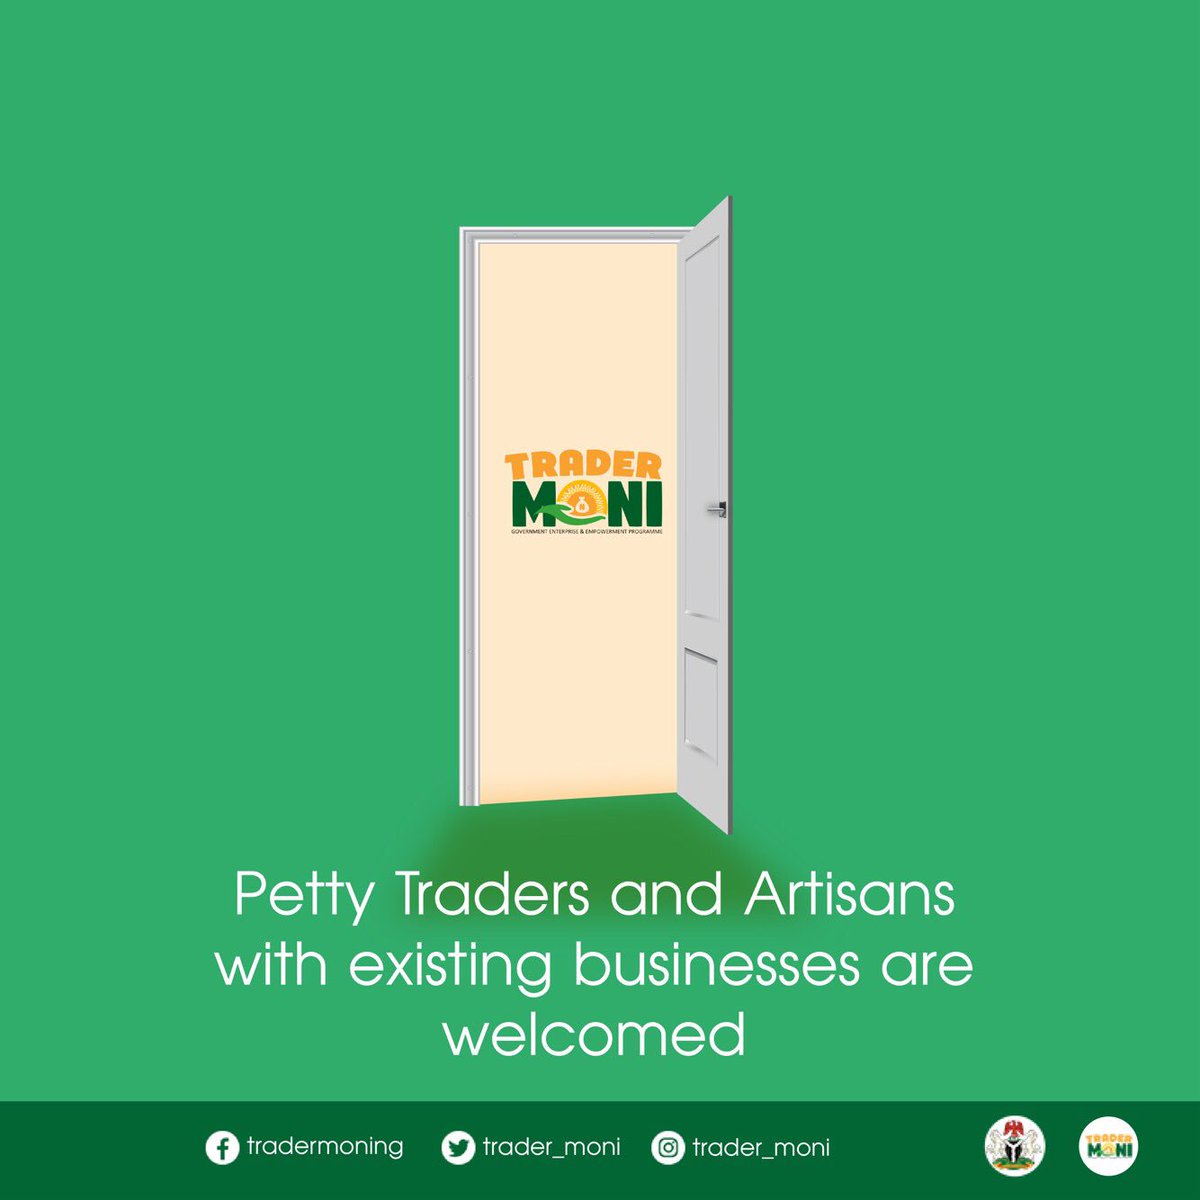 The door is always opened to grow small businesses, and maintain a self-sufficient workforce in the society. 
#tradermoni #fosteringchange